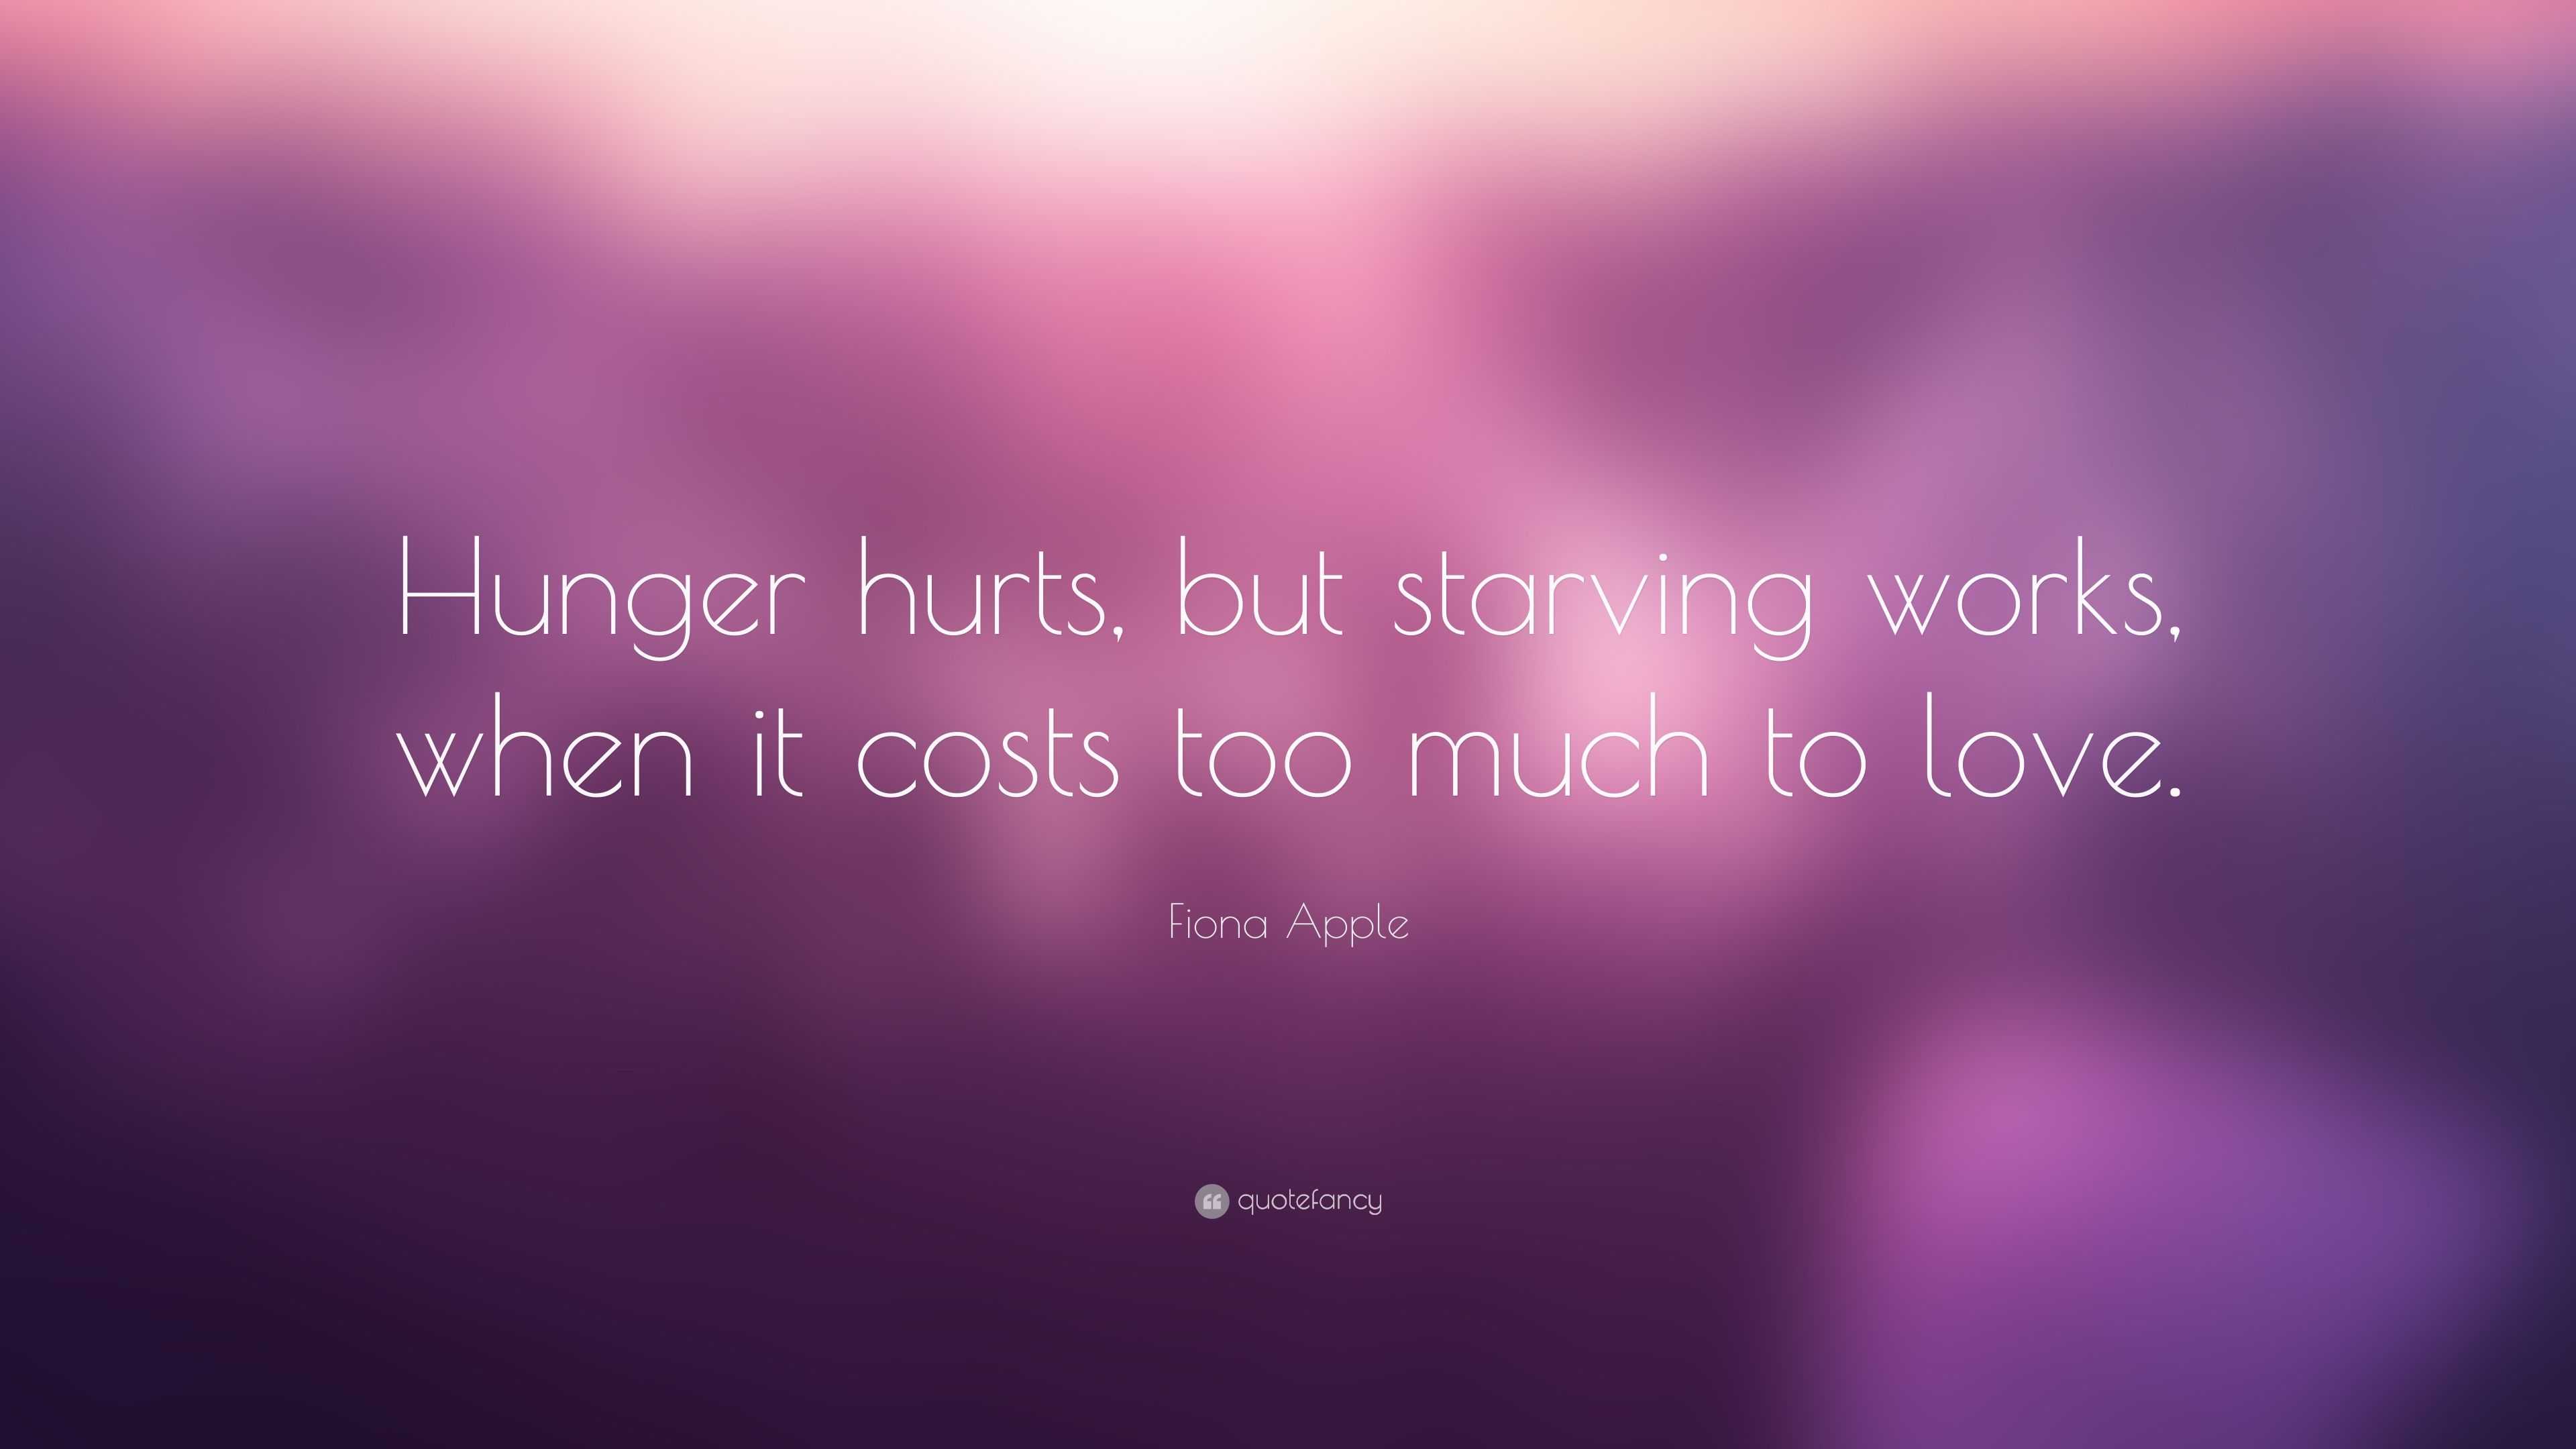 Fiona Apple Quote “Hunger hurts but starving works when it costs too